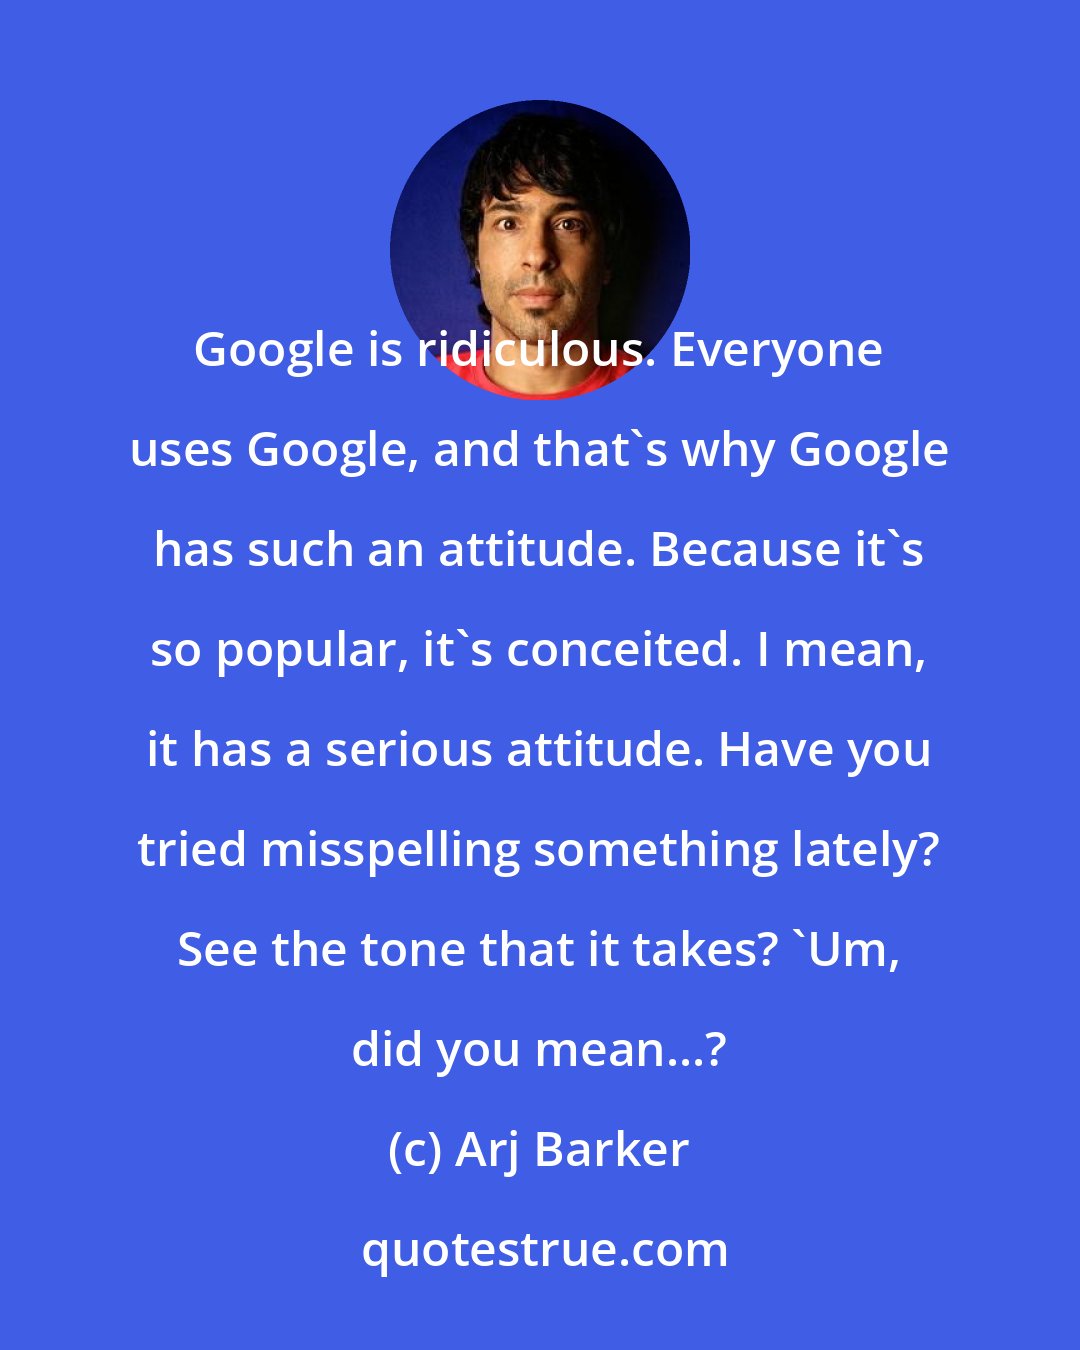 Arj Barker: Google is ridiculous. Everyone uses Google, and that's why Google has such an attitude. Because it's so popular, it's conceited. I mean, it has a serious attitude. Have you tried misspelling something lately? See the tone that it takes? 'Um, did you mean...?